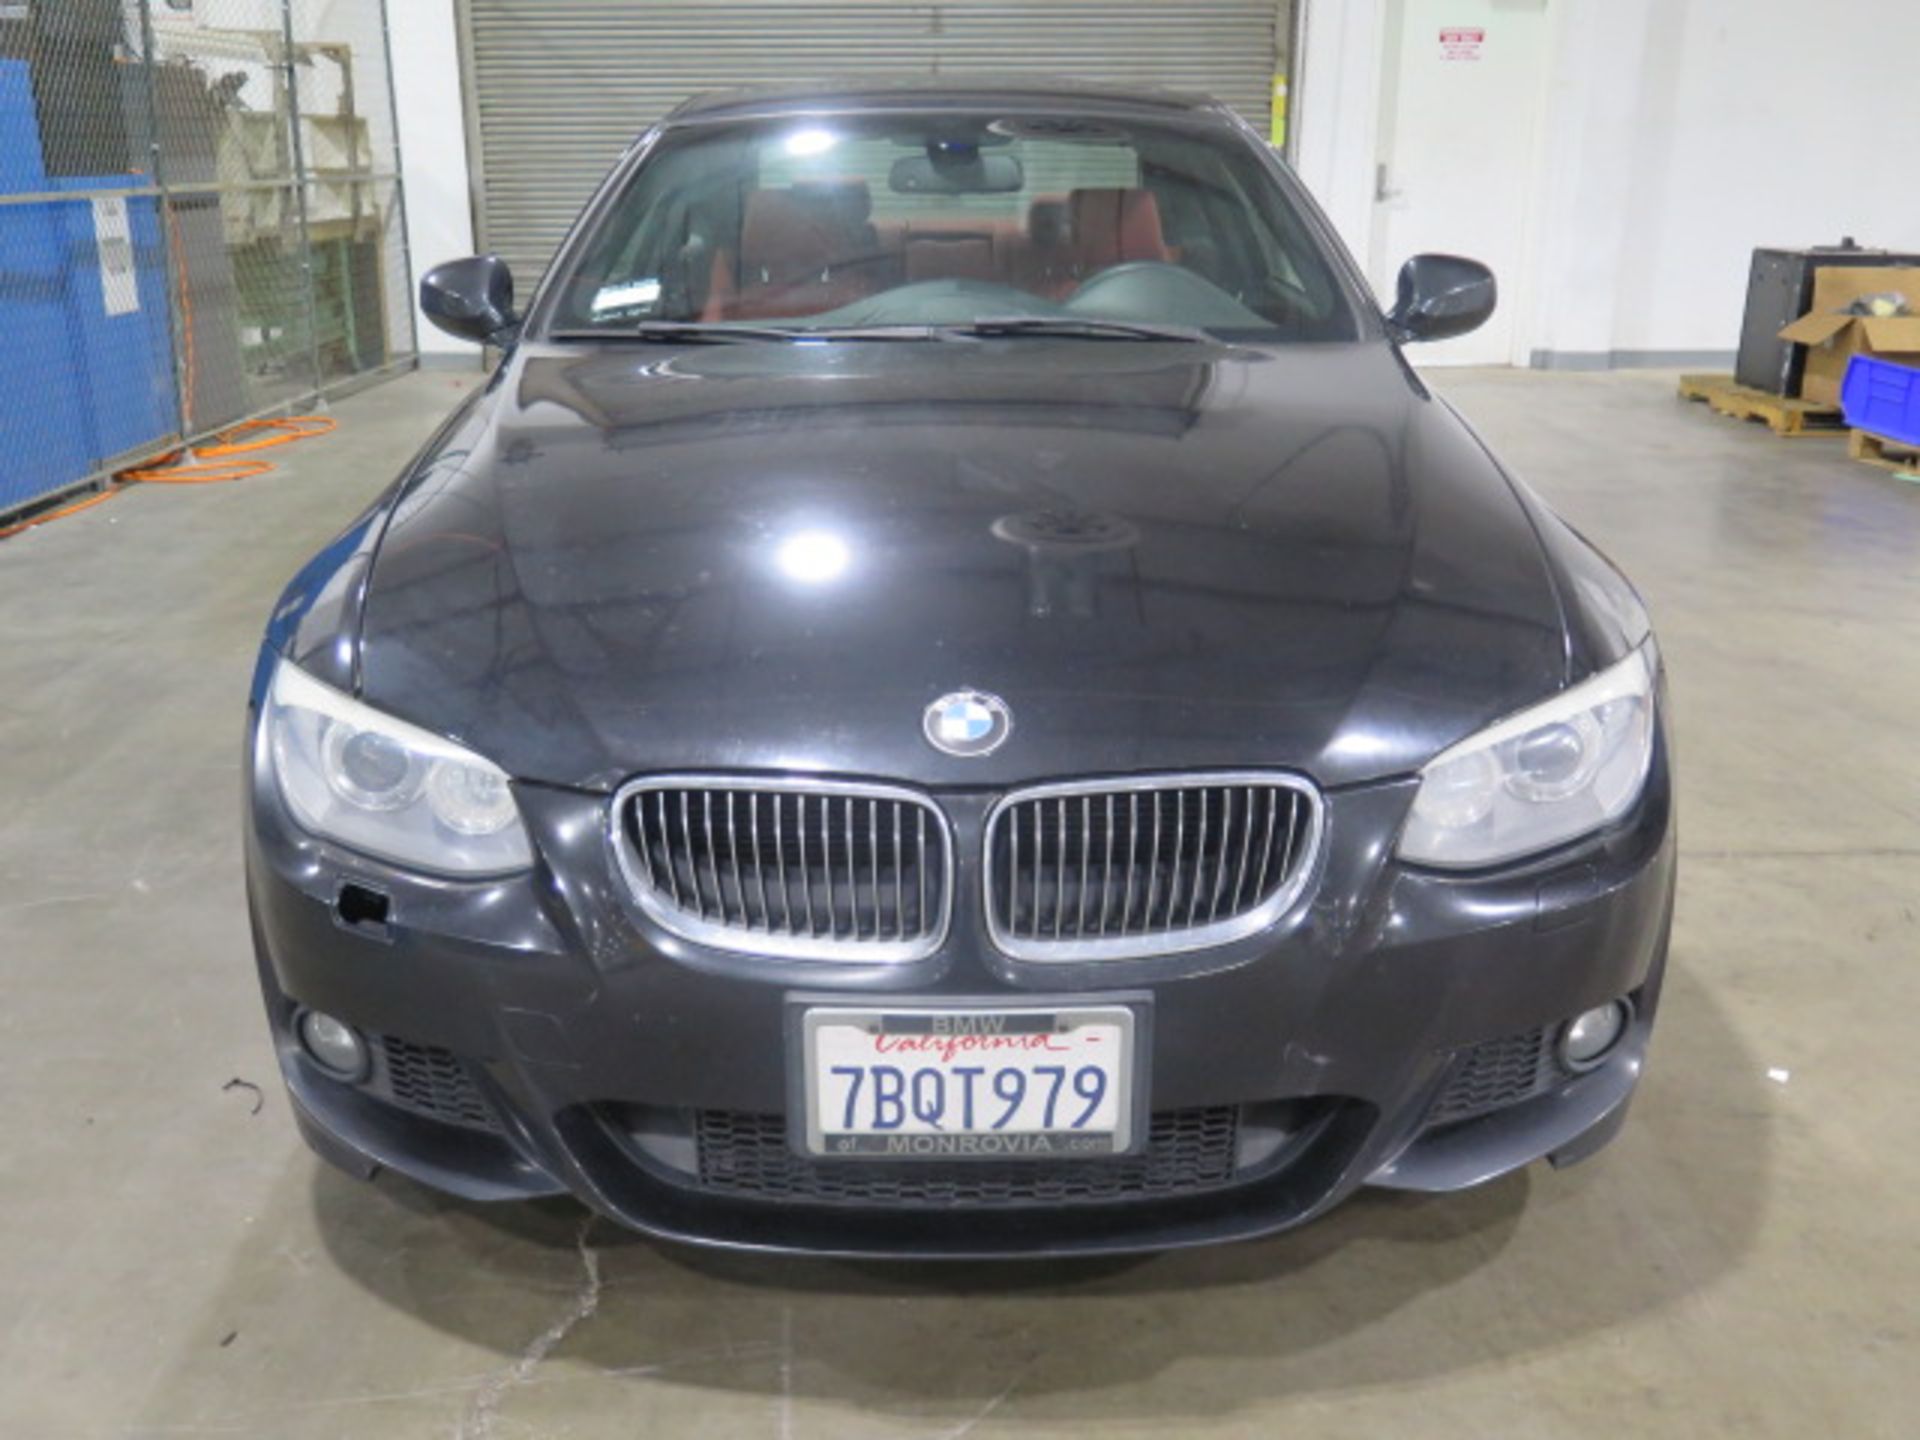 2013 BMW 335i 2-Door Coupe Lisc# 7BQT979 w/ Twin Power Turbo Gas Engine, Automatic Trans, SOLD AS IS - Bild 6 aus 31